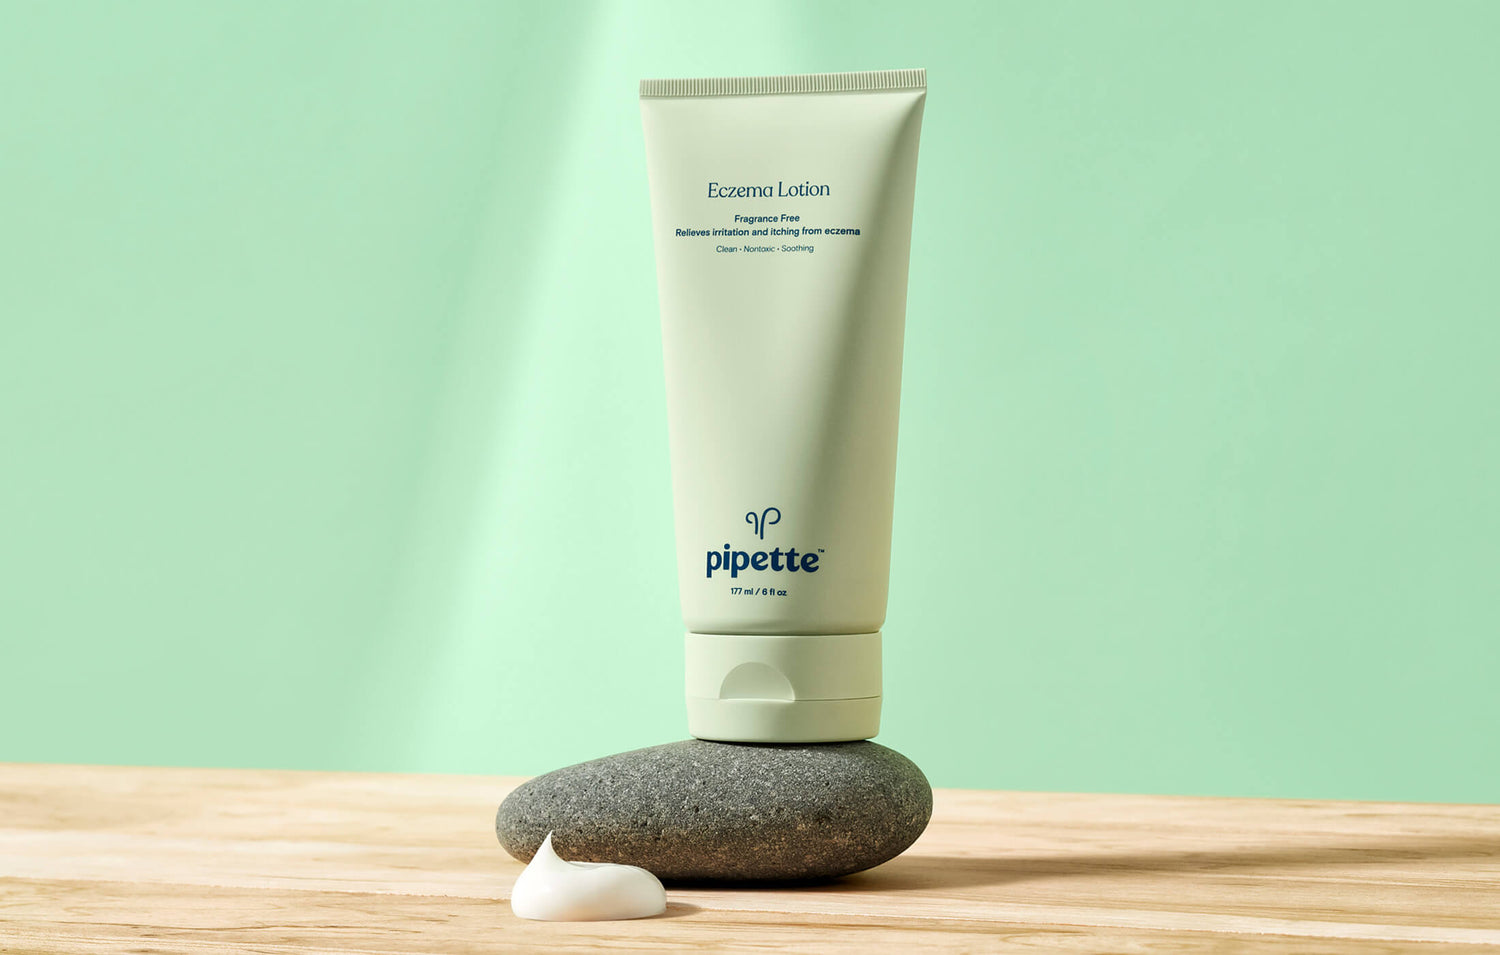 Pipette bestselling Eczema Lotion